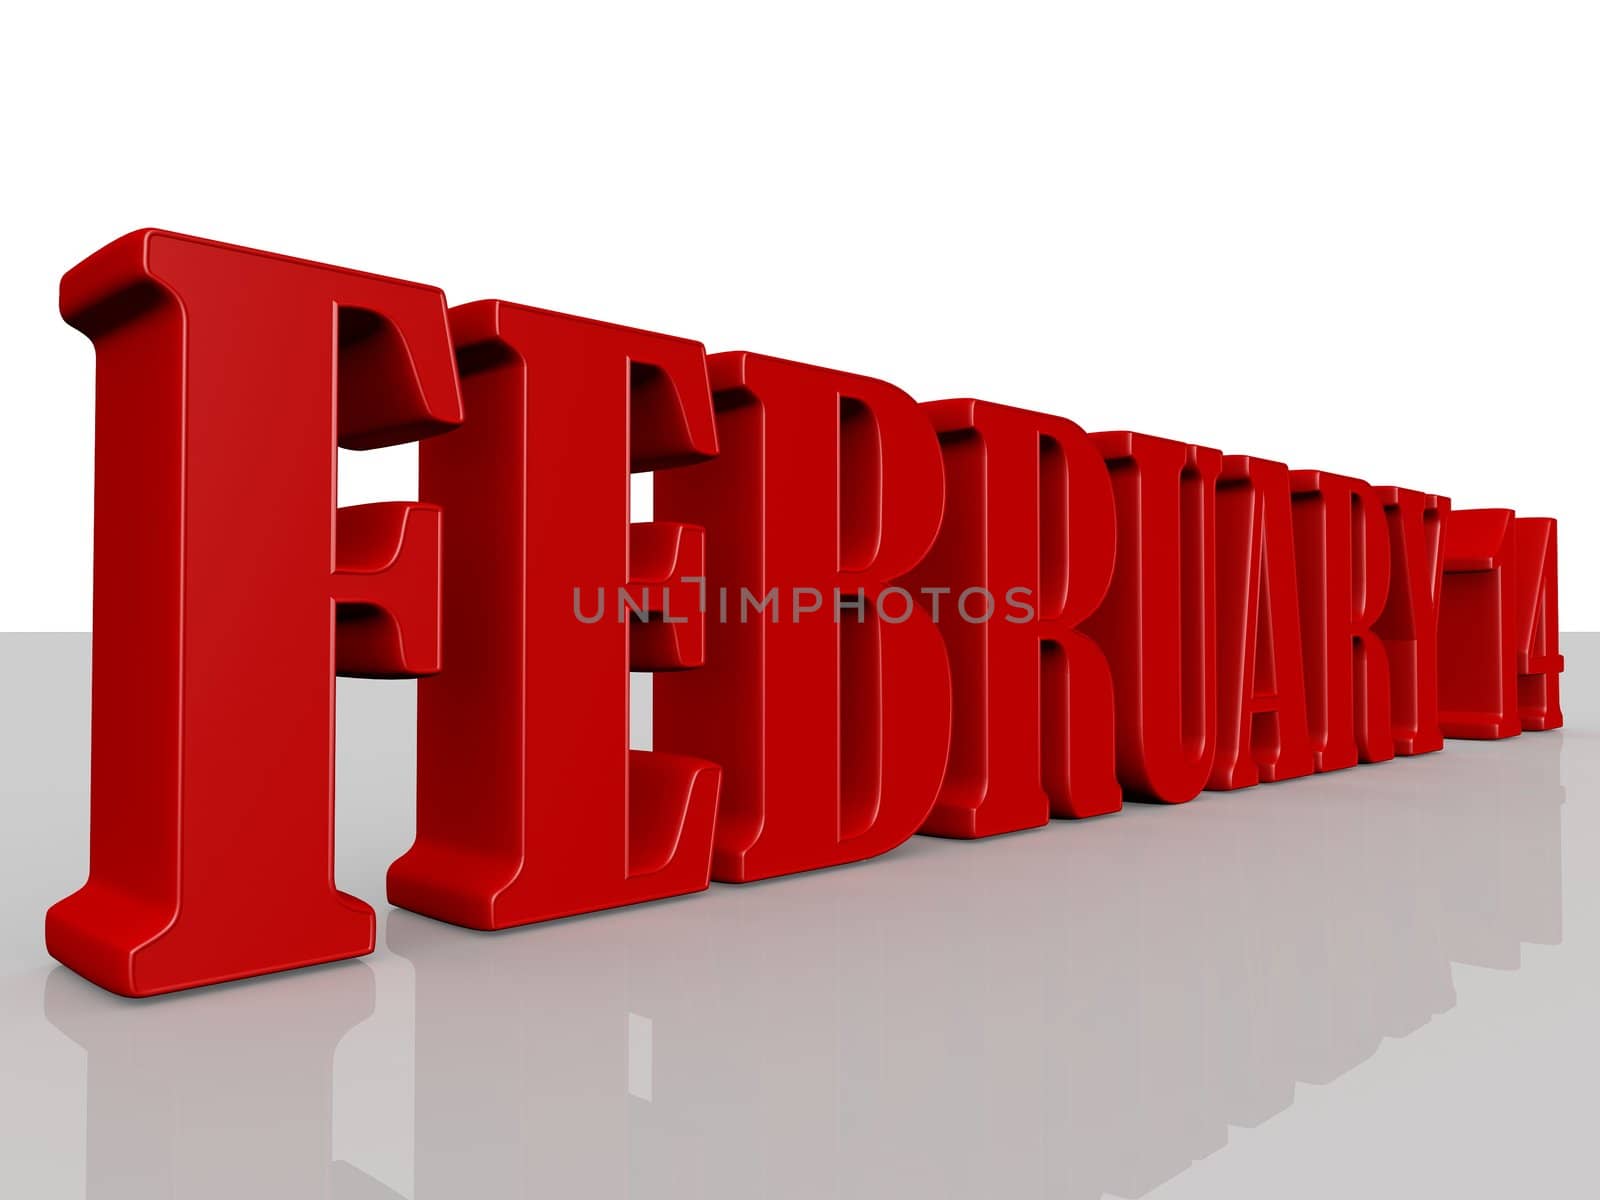 3d generated illustration of month February 14 sign

